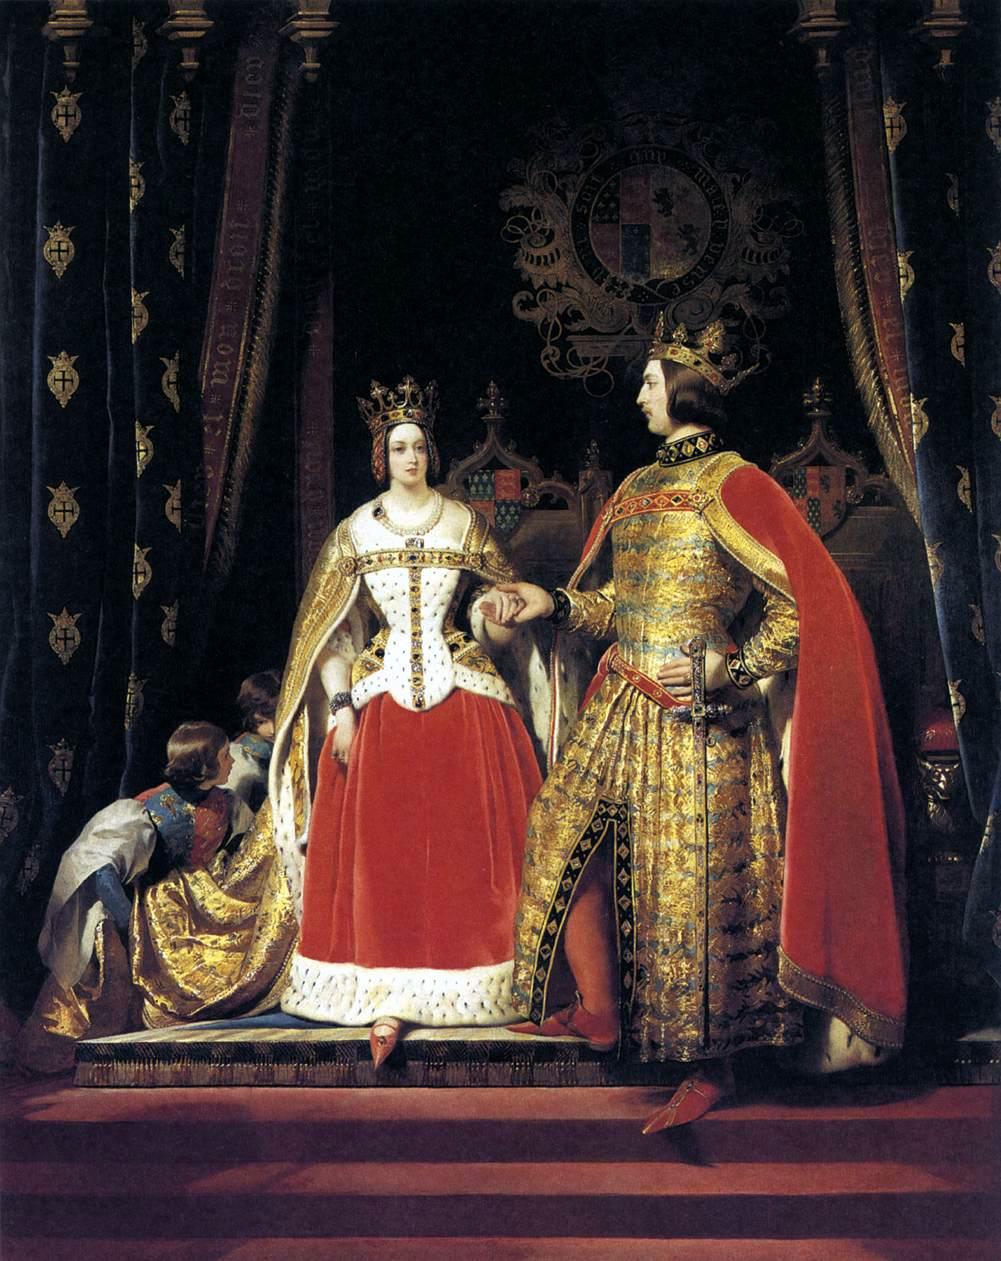 Queen Victoria And Prince Albert At The Bal Costume Of 12 May 1842 by Edwin Landseer